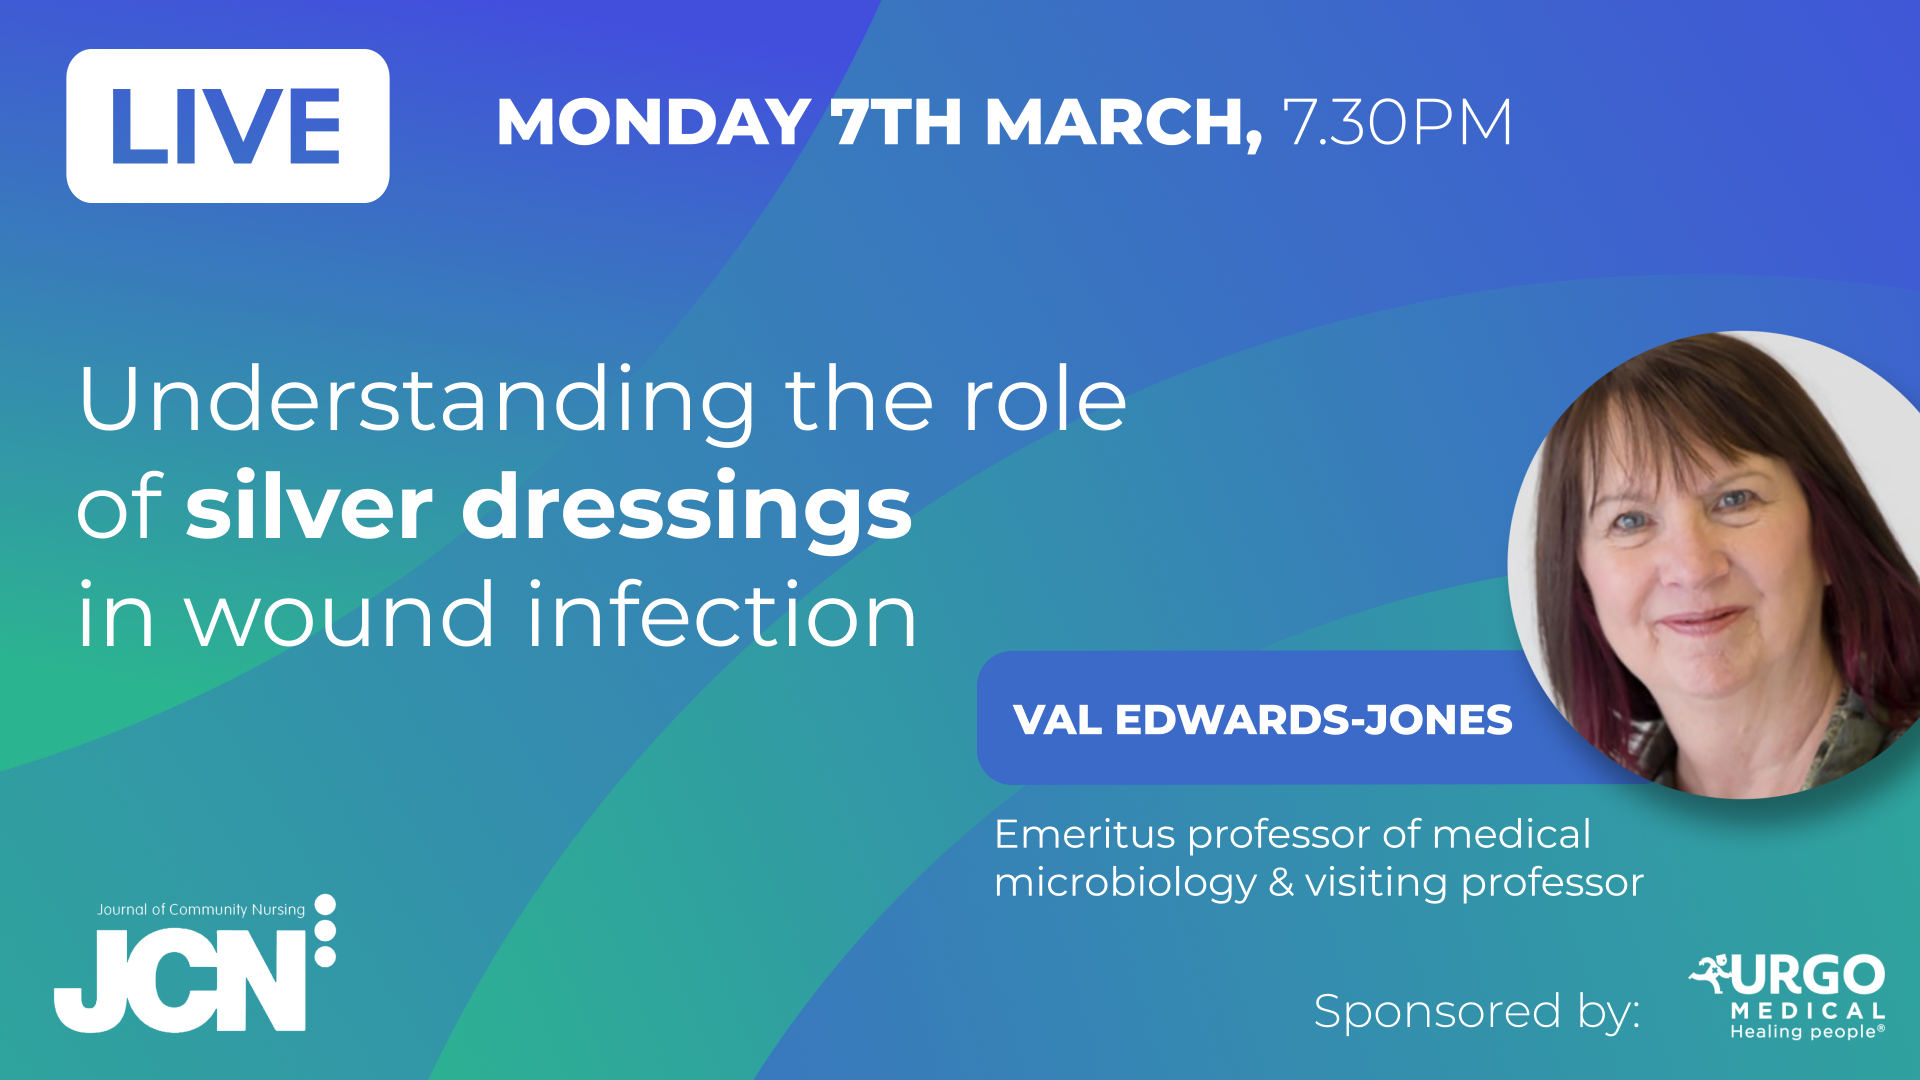 Facebook Live: Understanding the role of silver dressings in wound infection